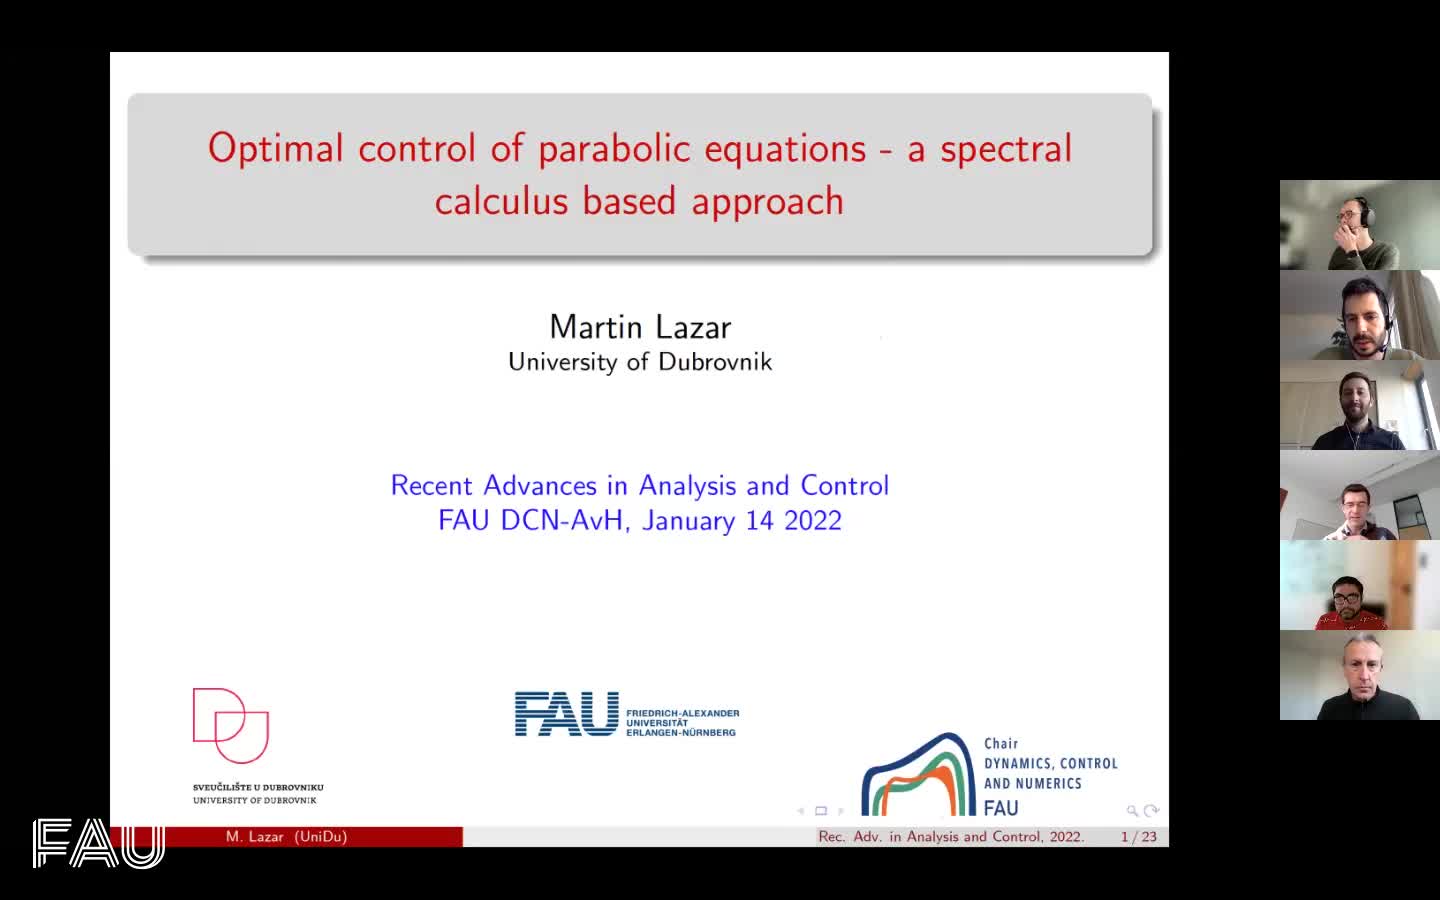 Optimal control of parabolic equations - a spectral calculus based approach (M. Lazar, U. of Dubrovnik) preview image